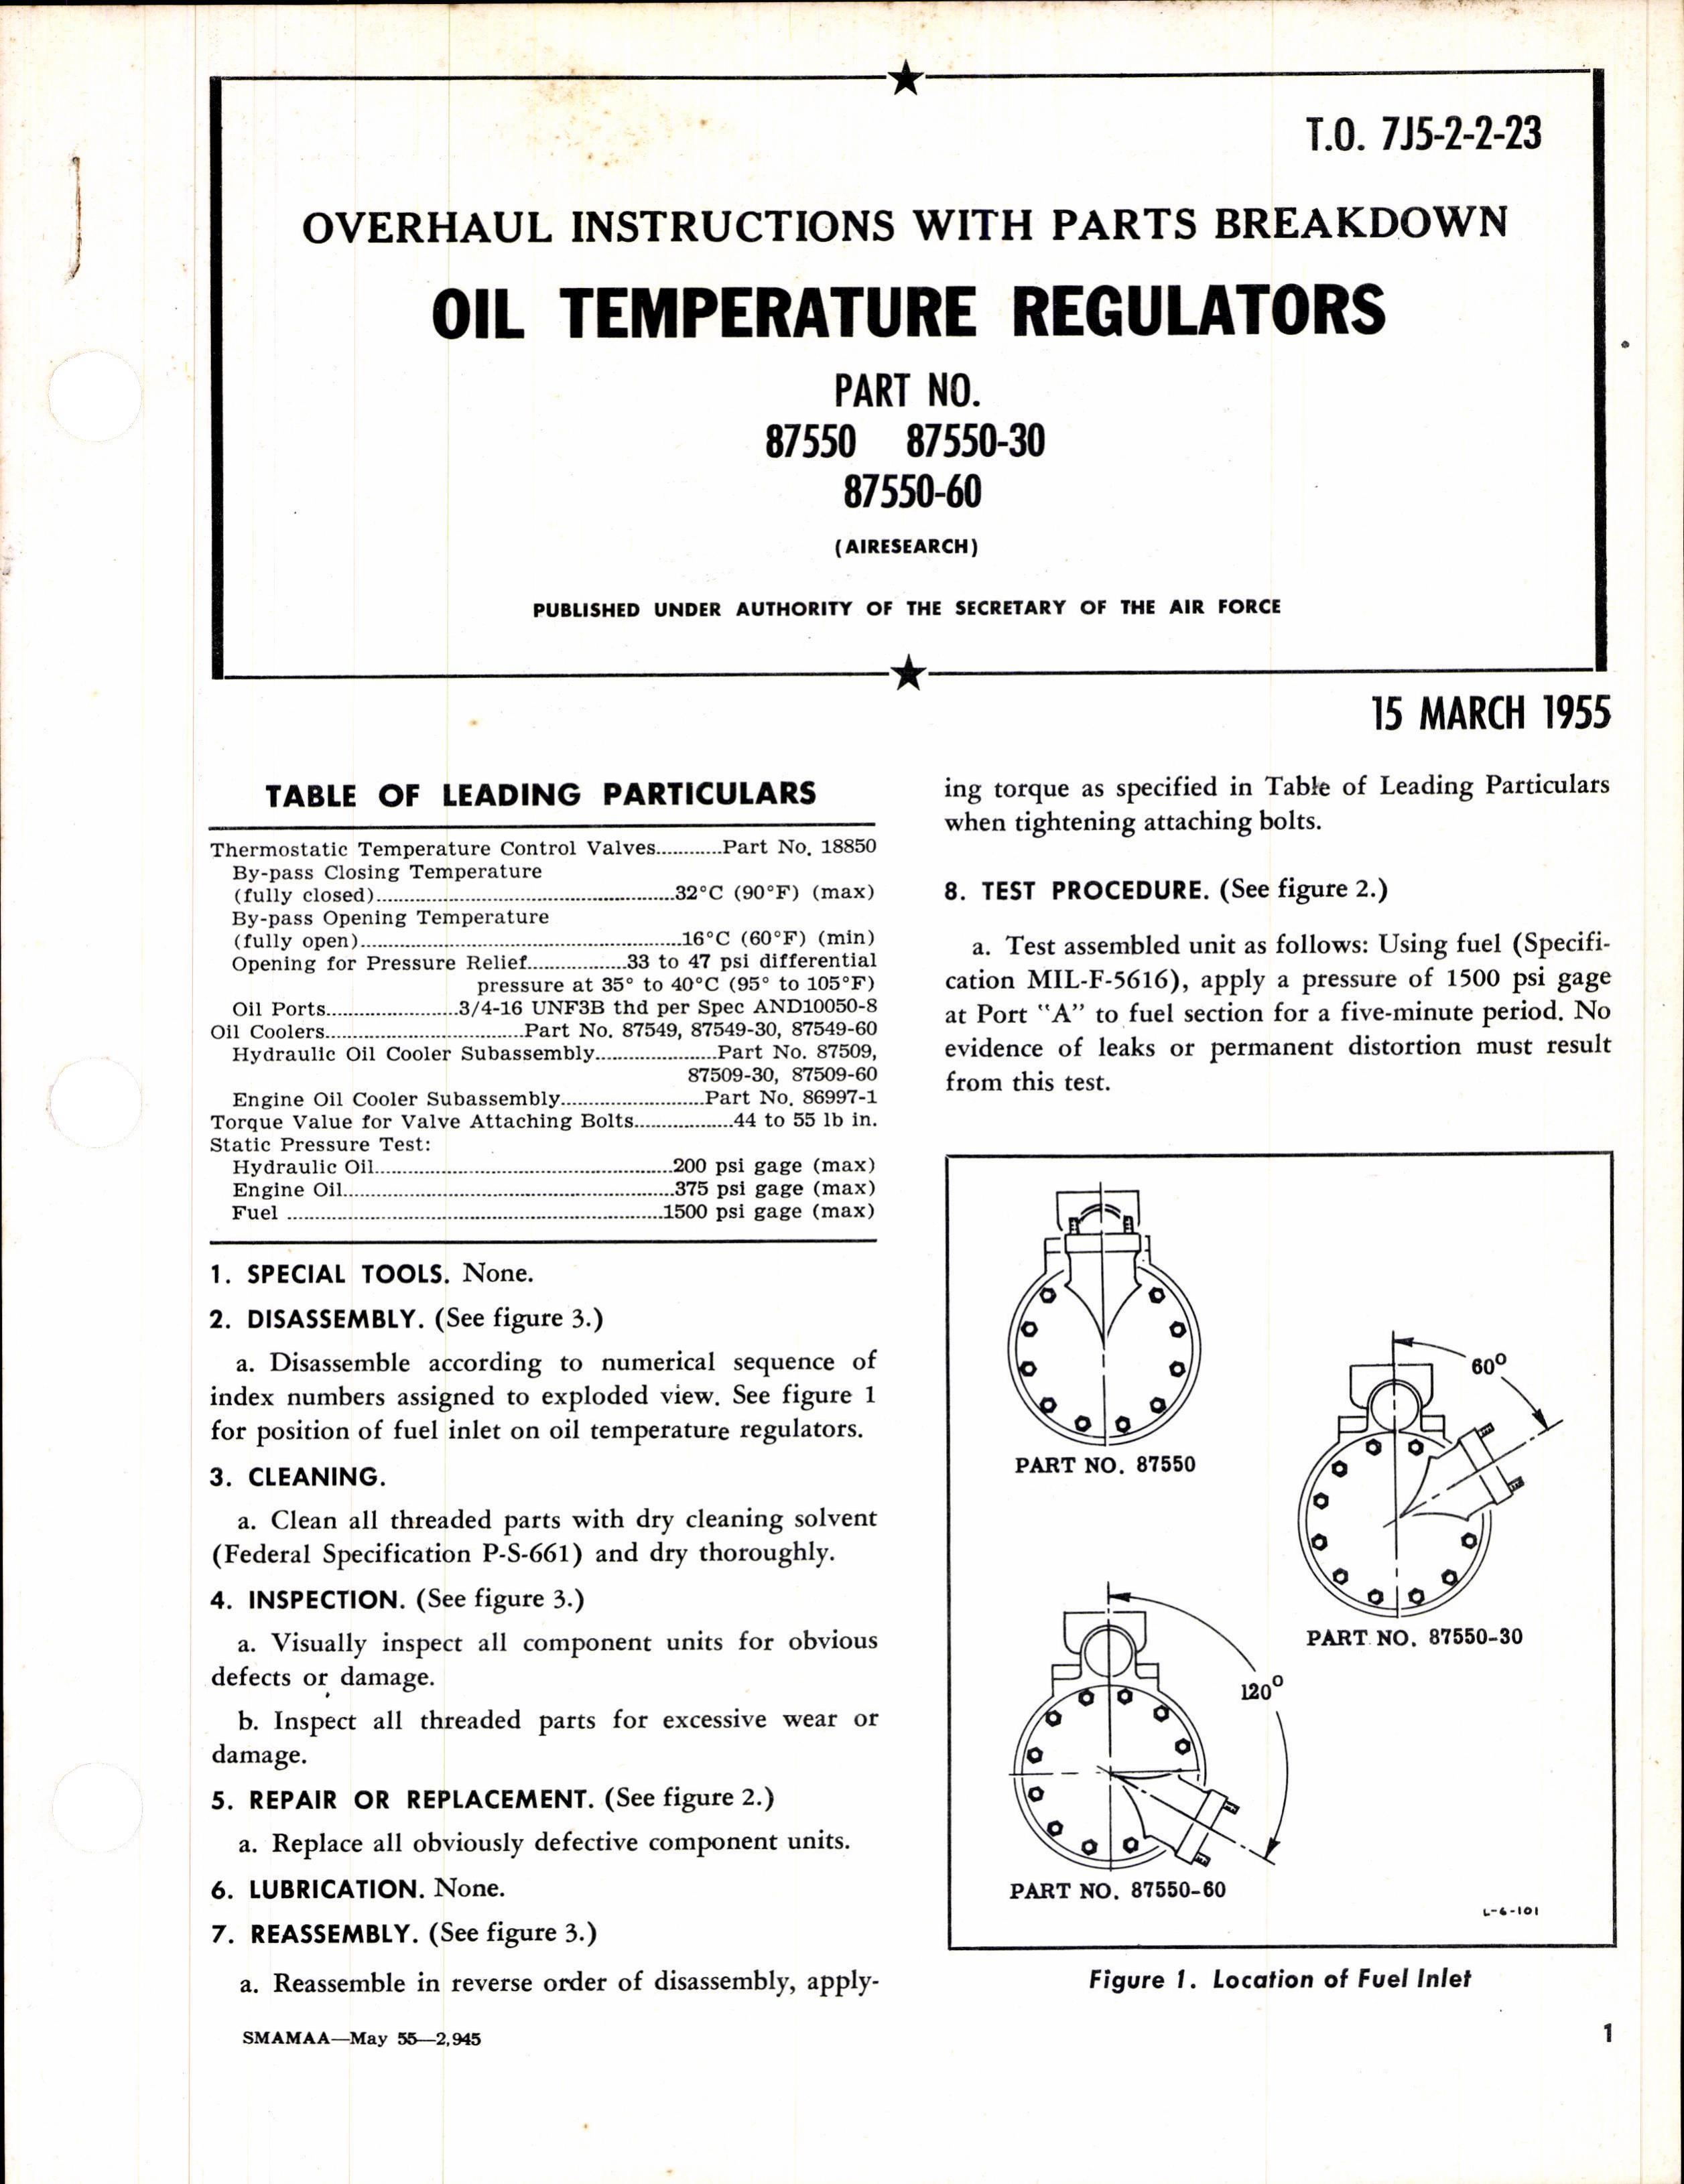 Sample page 1 from AirCorps Library document: Overhaul Instructions with Parts Breakdown for Oil Temperature Regulators